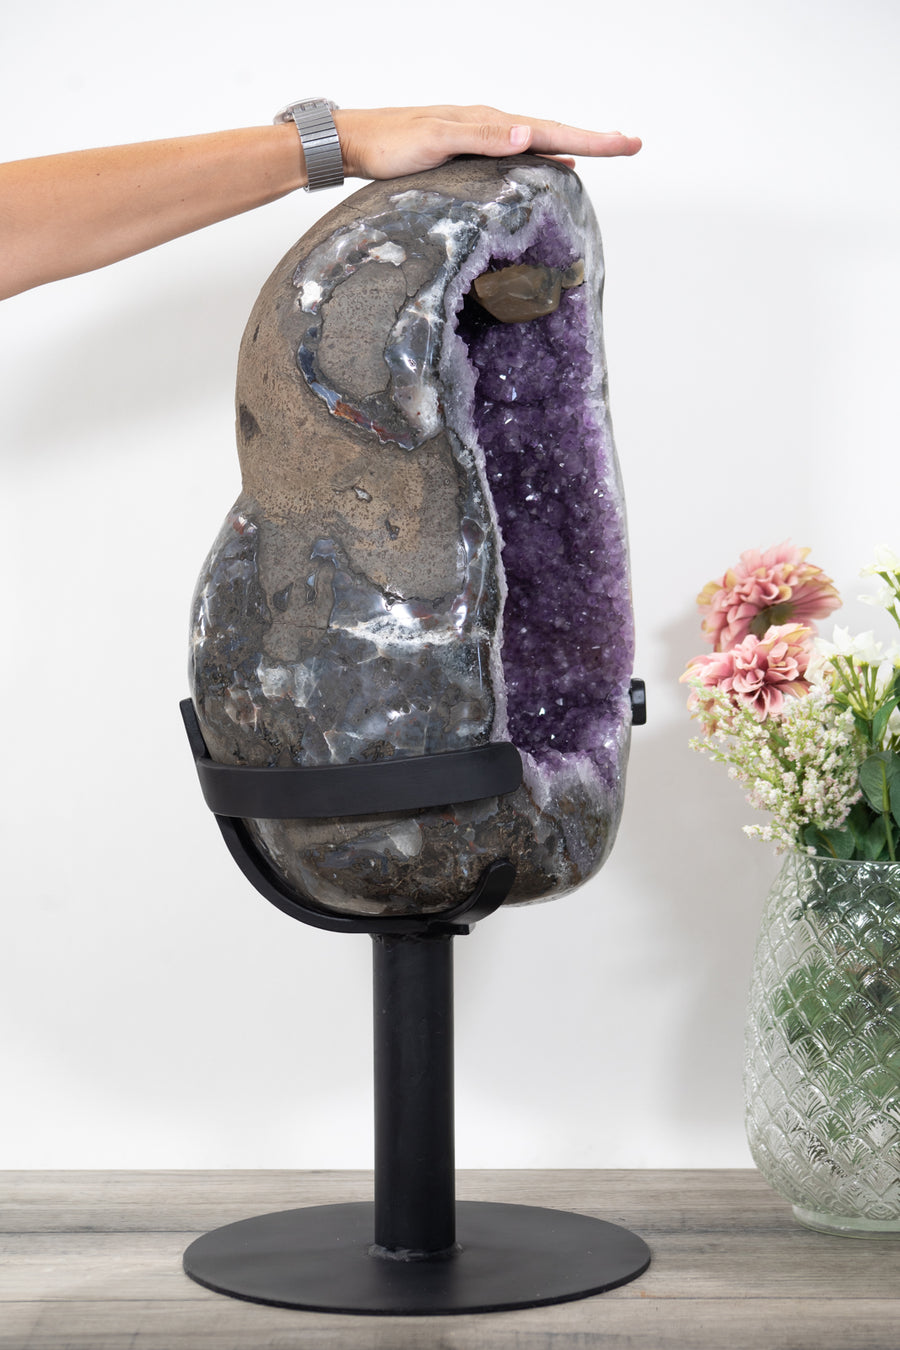 Huge Natural Amethyst Geode, Metal Stand Incuded - AWS1452